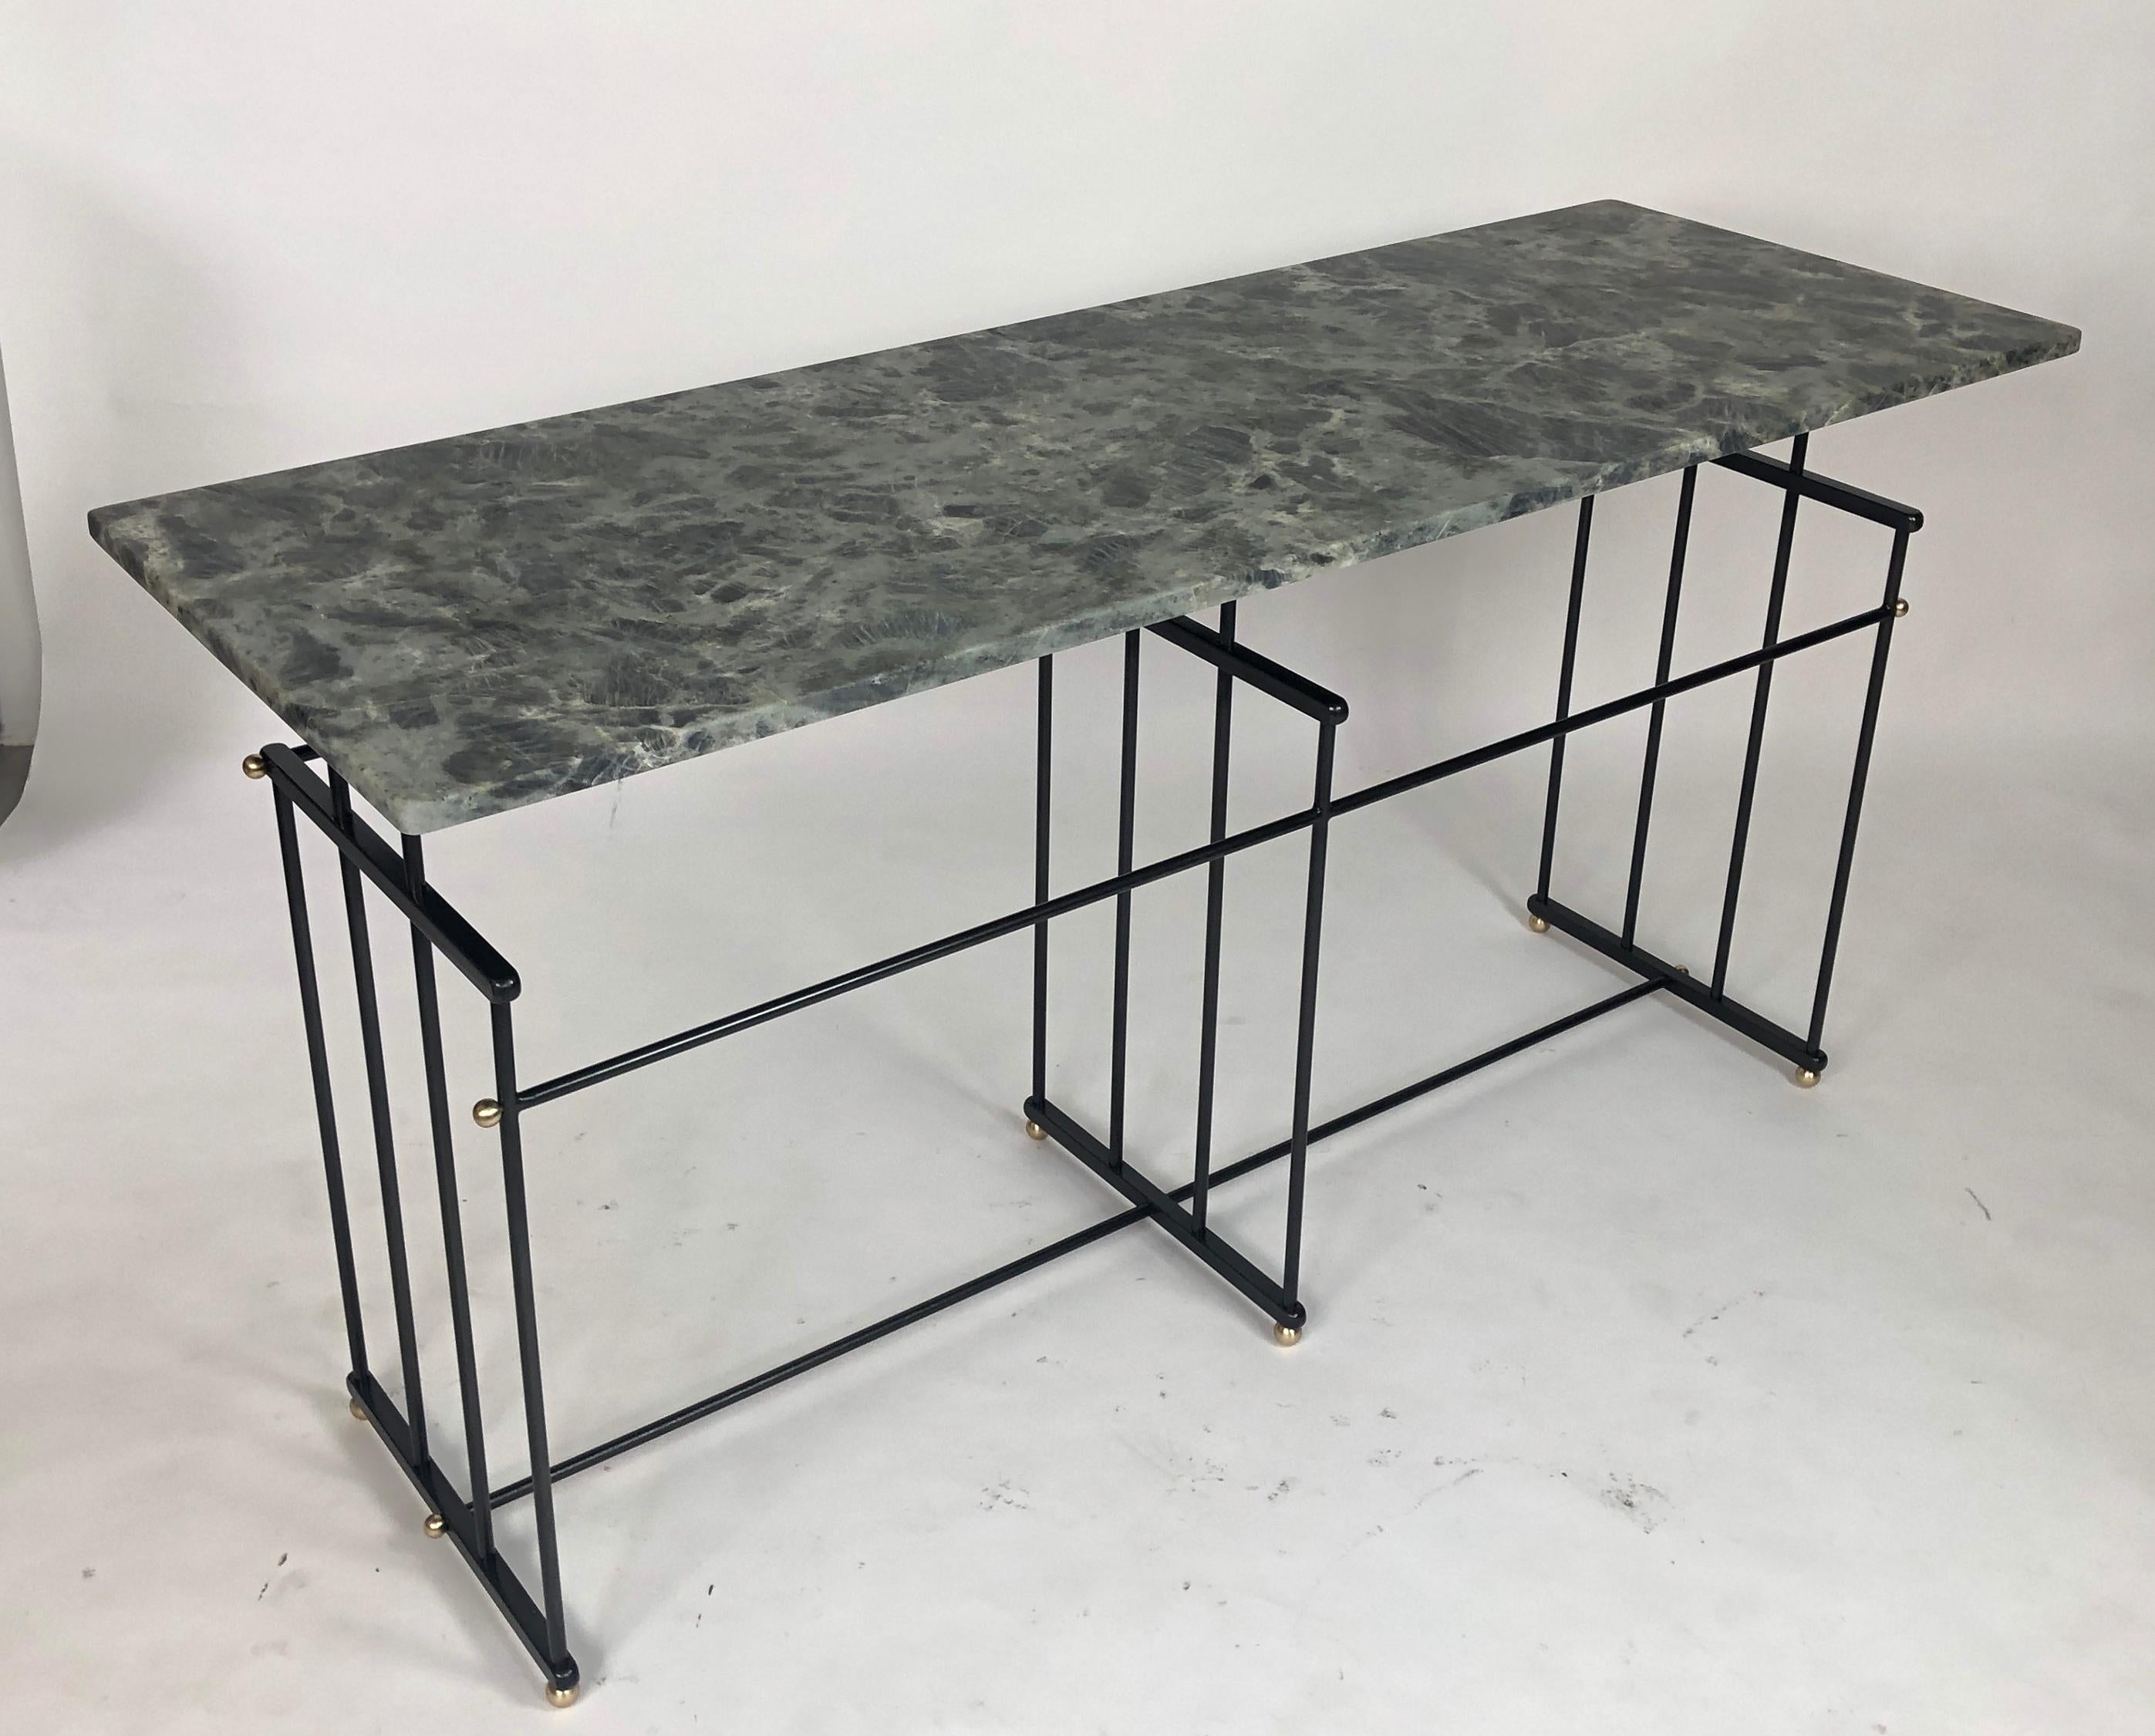 Art Deco inspired console table. Steel frame with a gun metal patina and brass accents. The top has an exceptional marble top. Black, grey with blue and silver crystalized marble. Customization possible. Custom sizes and marble top options.